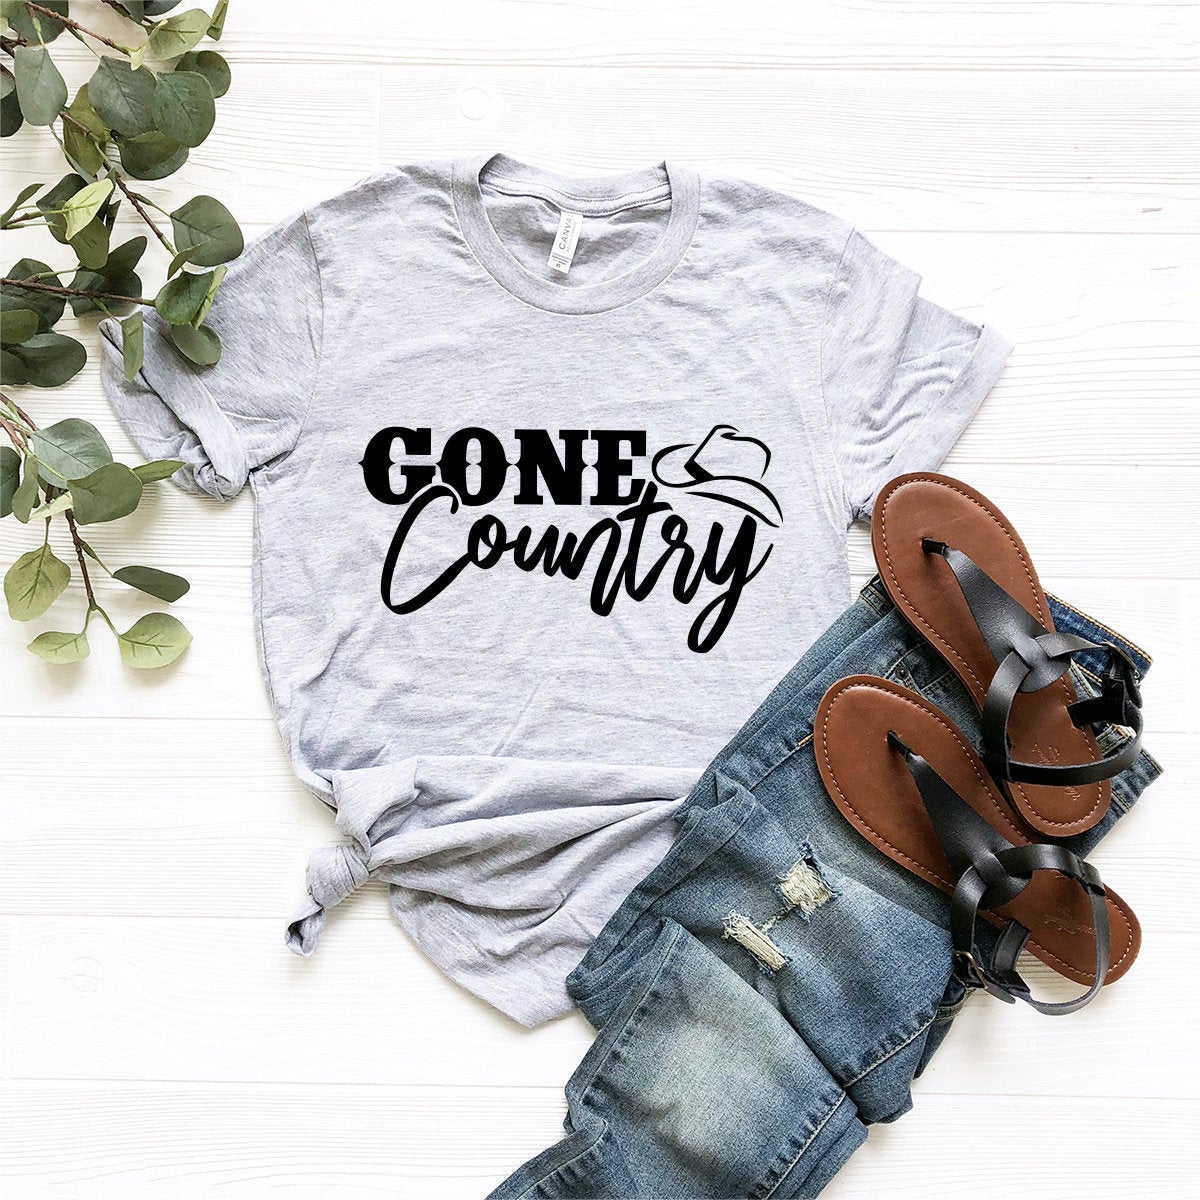 Gone Country, Country Girl Shirt, Country Boy Shirt, Western Shirt, Western Graphic Tee, Southern Shirt, Country T-Shirt, Cowgirl T-Shirt - Fastdeliverytees.com